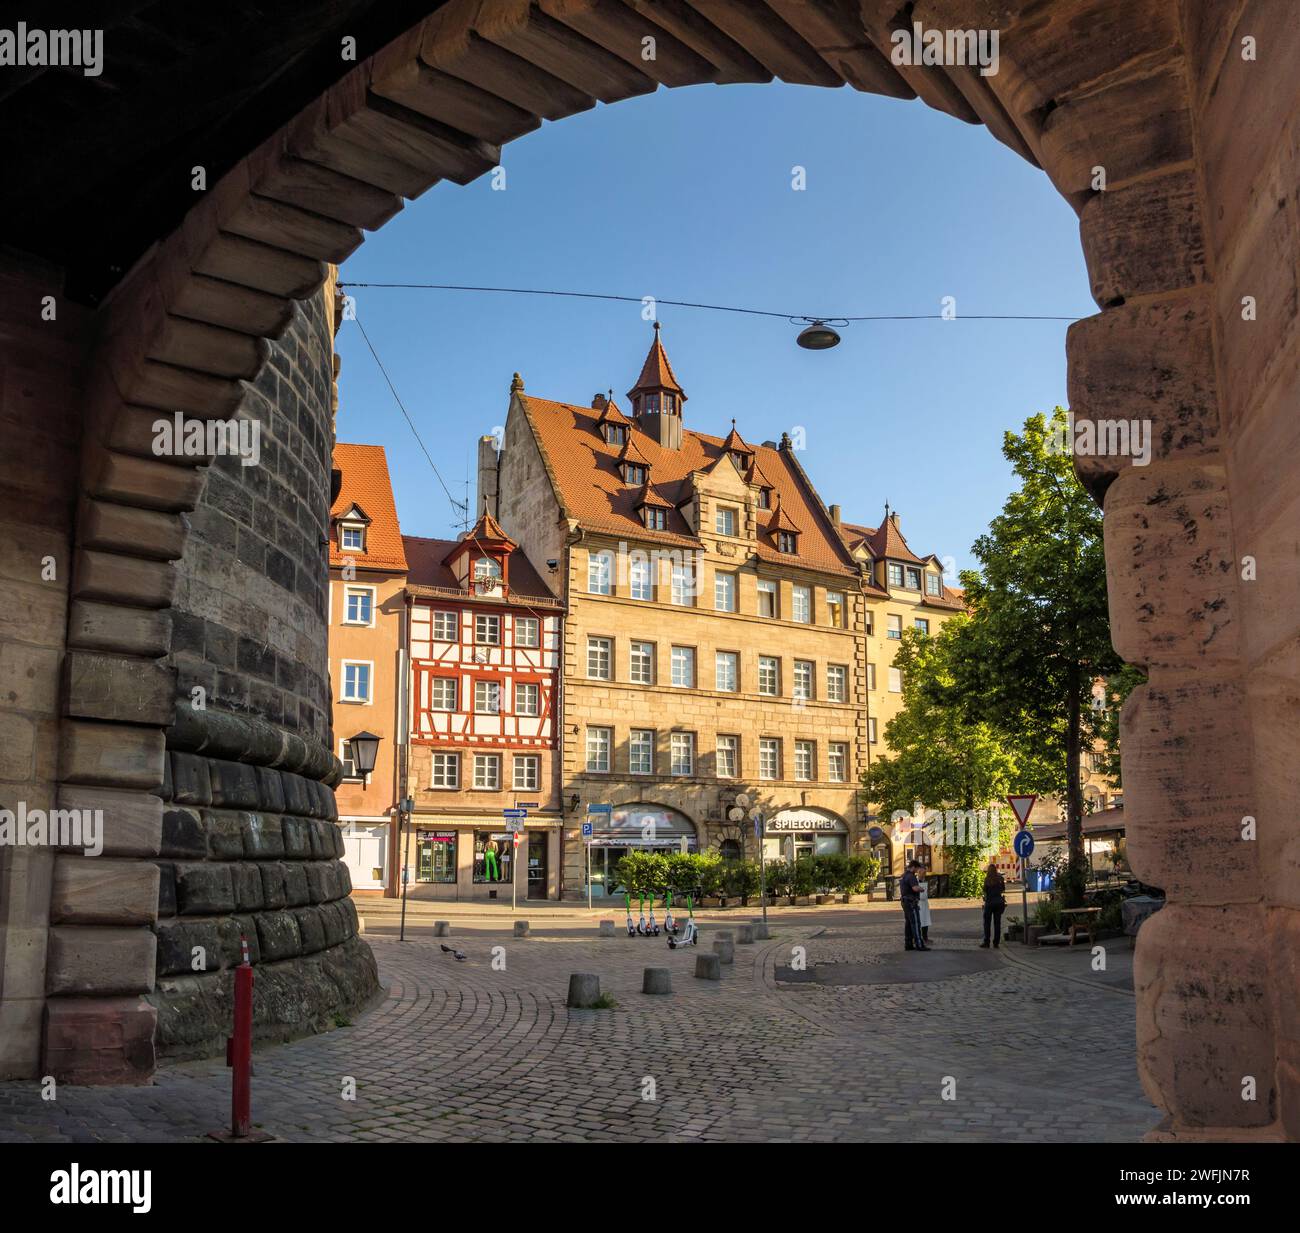 View through archway at Spittlertor tower to old town houses in Ludwigsstraße in Nuremberg, Bavaria, Germany Stock Photo